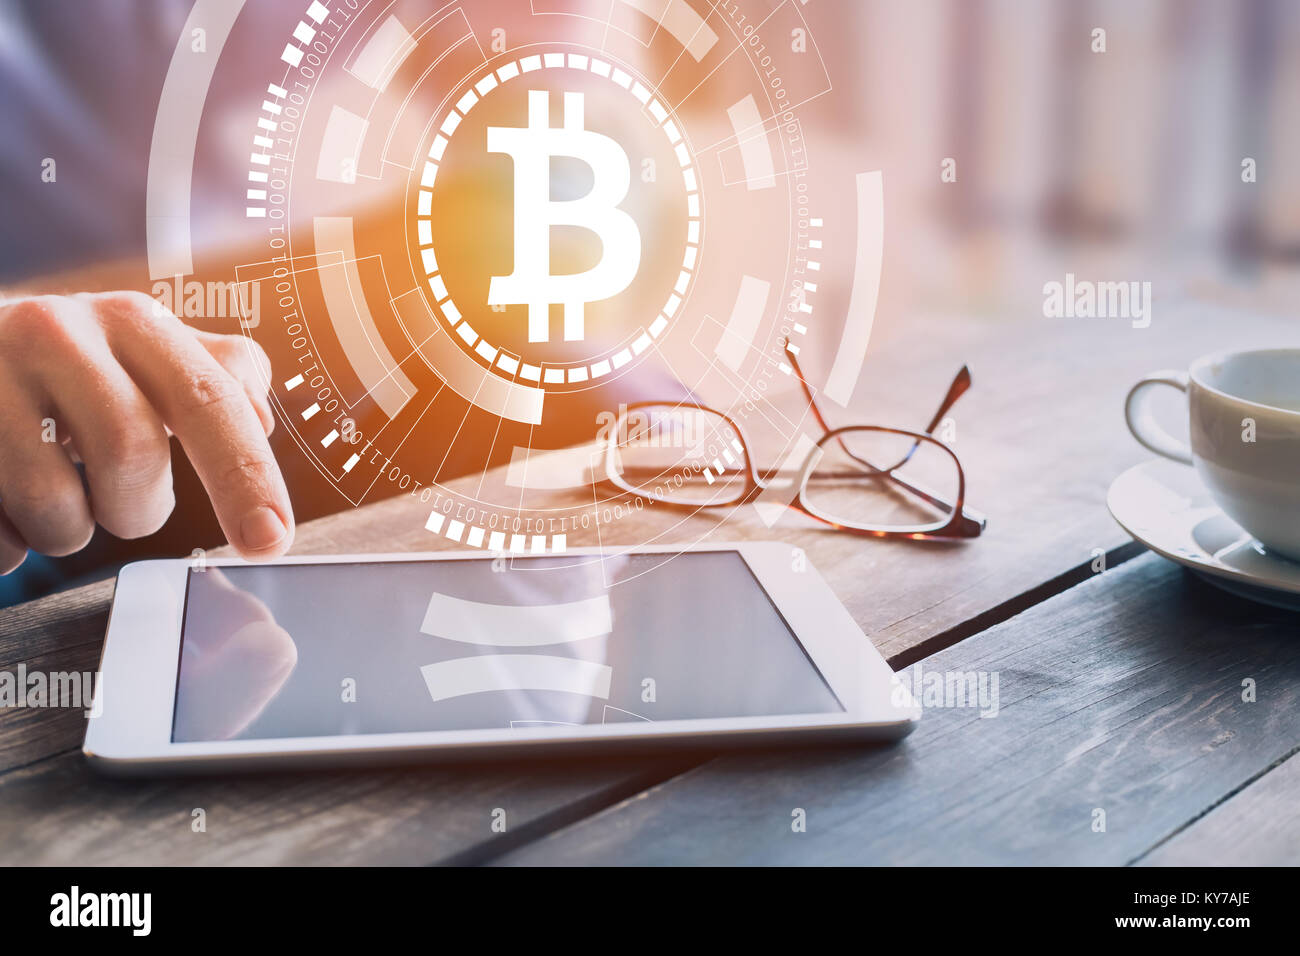 Bitcoin blockchain cryptocurrency technology concept with businessman investing, trading or paying on digital tablet computer with virtual interface w Stock Photo